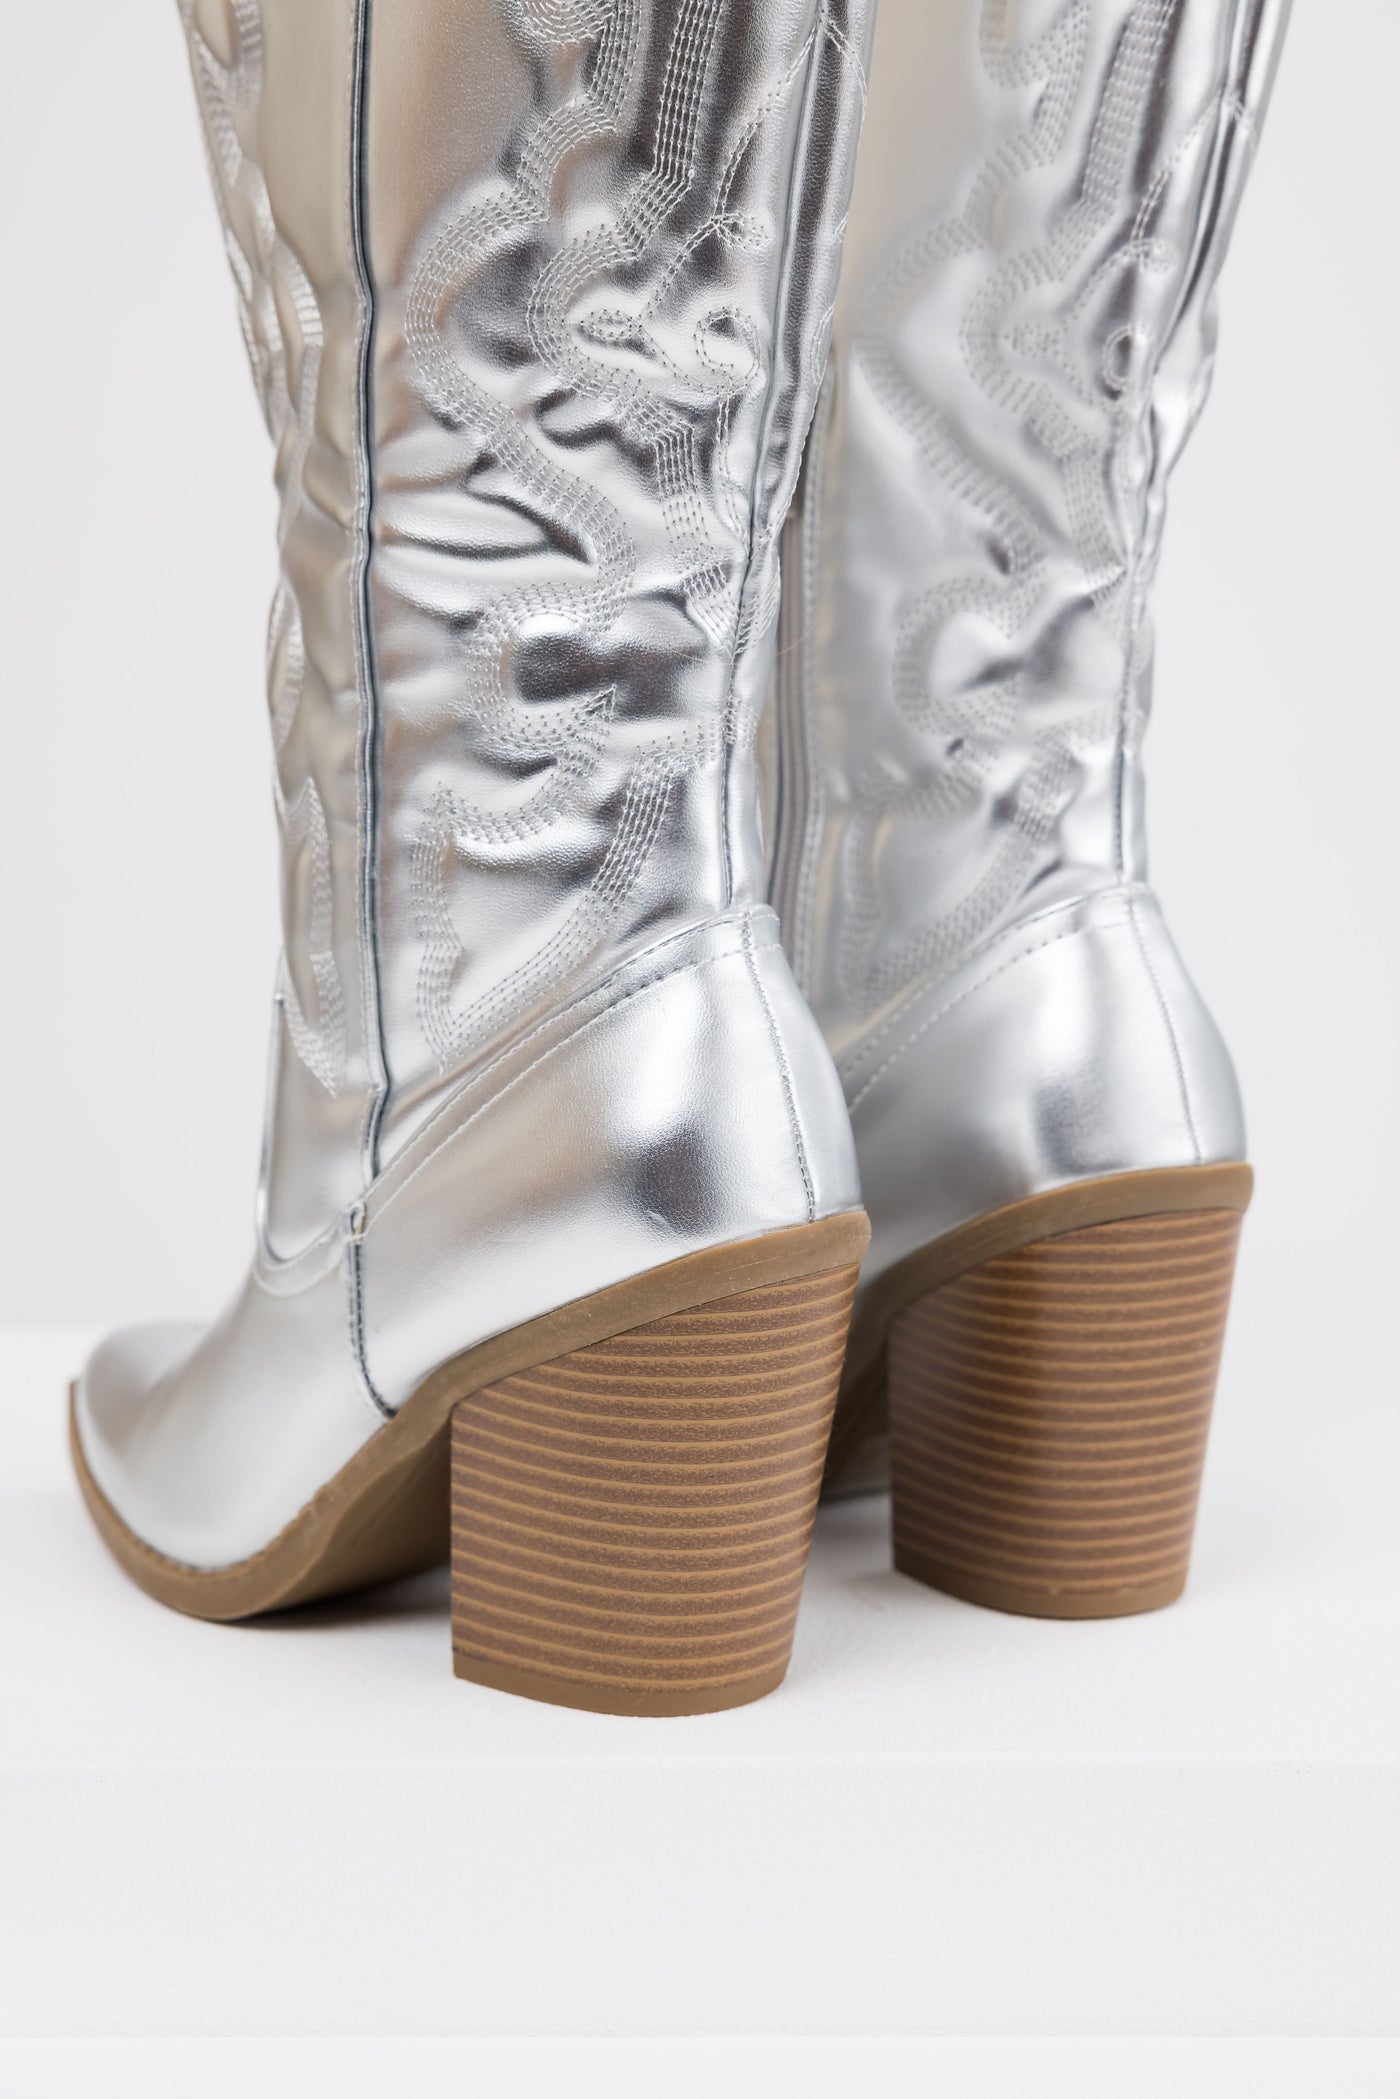 Silver Faux Leather Metallic Western Boots